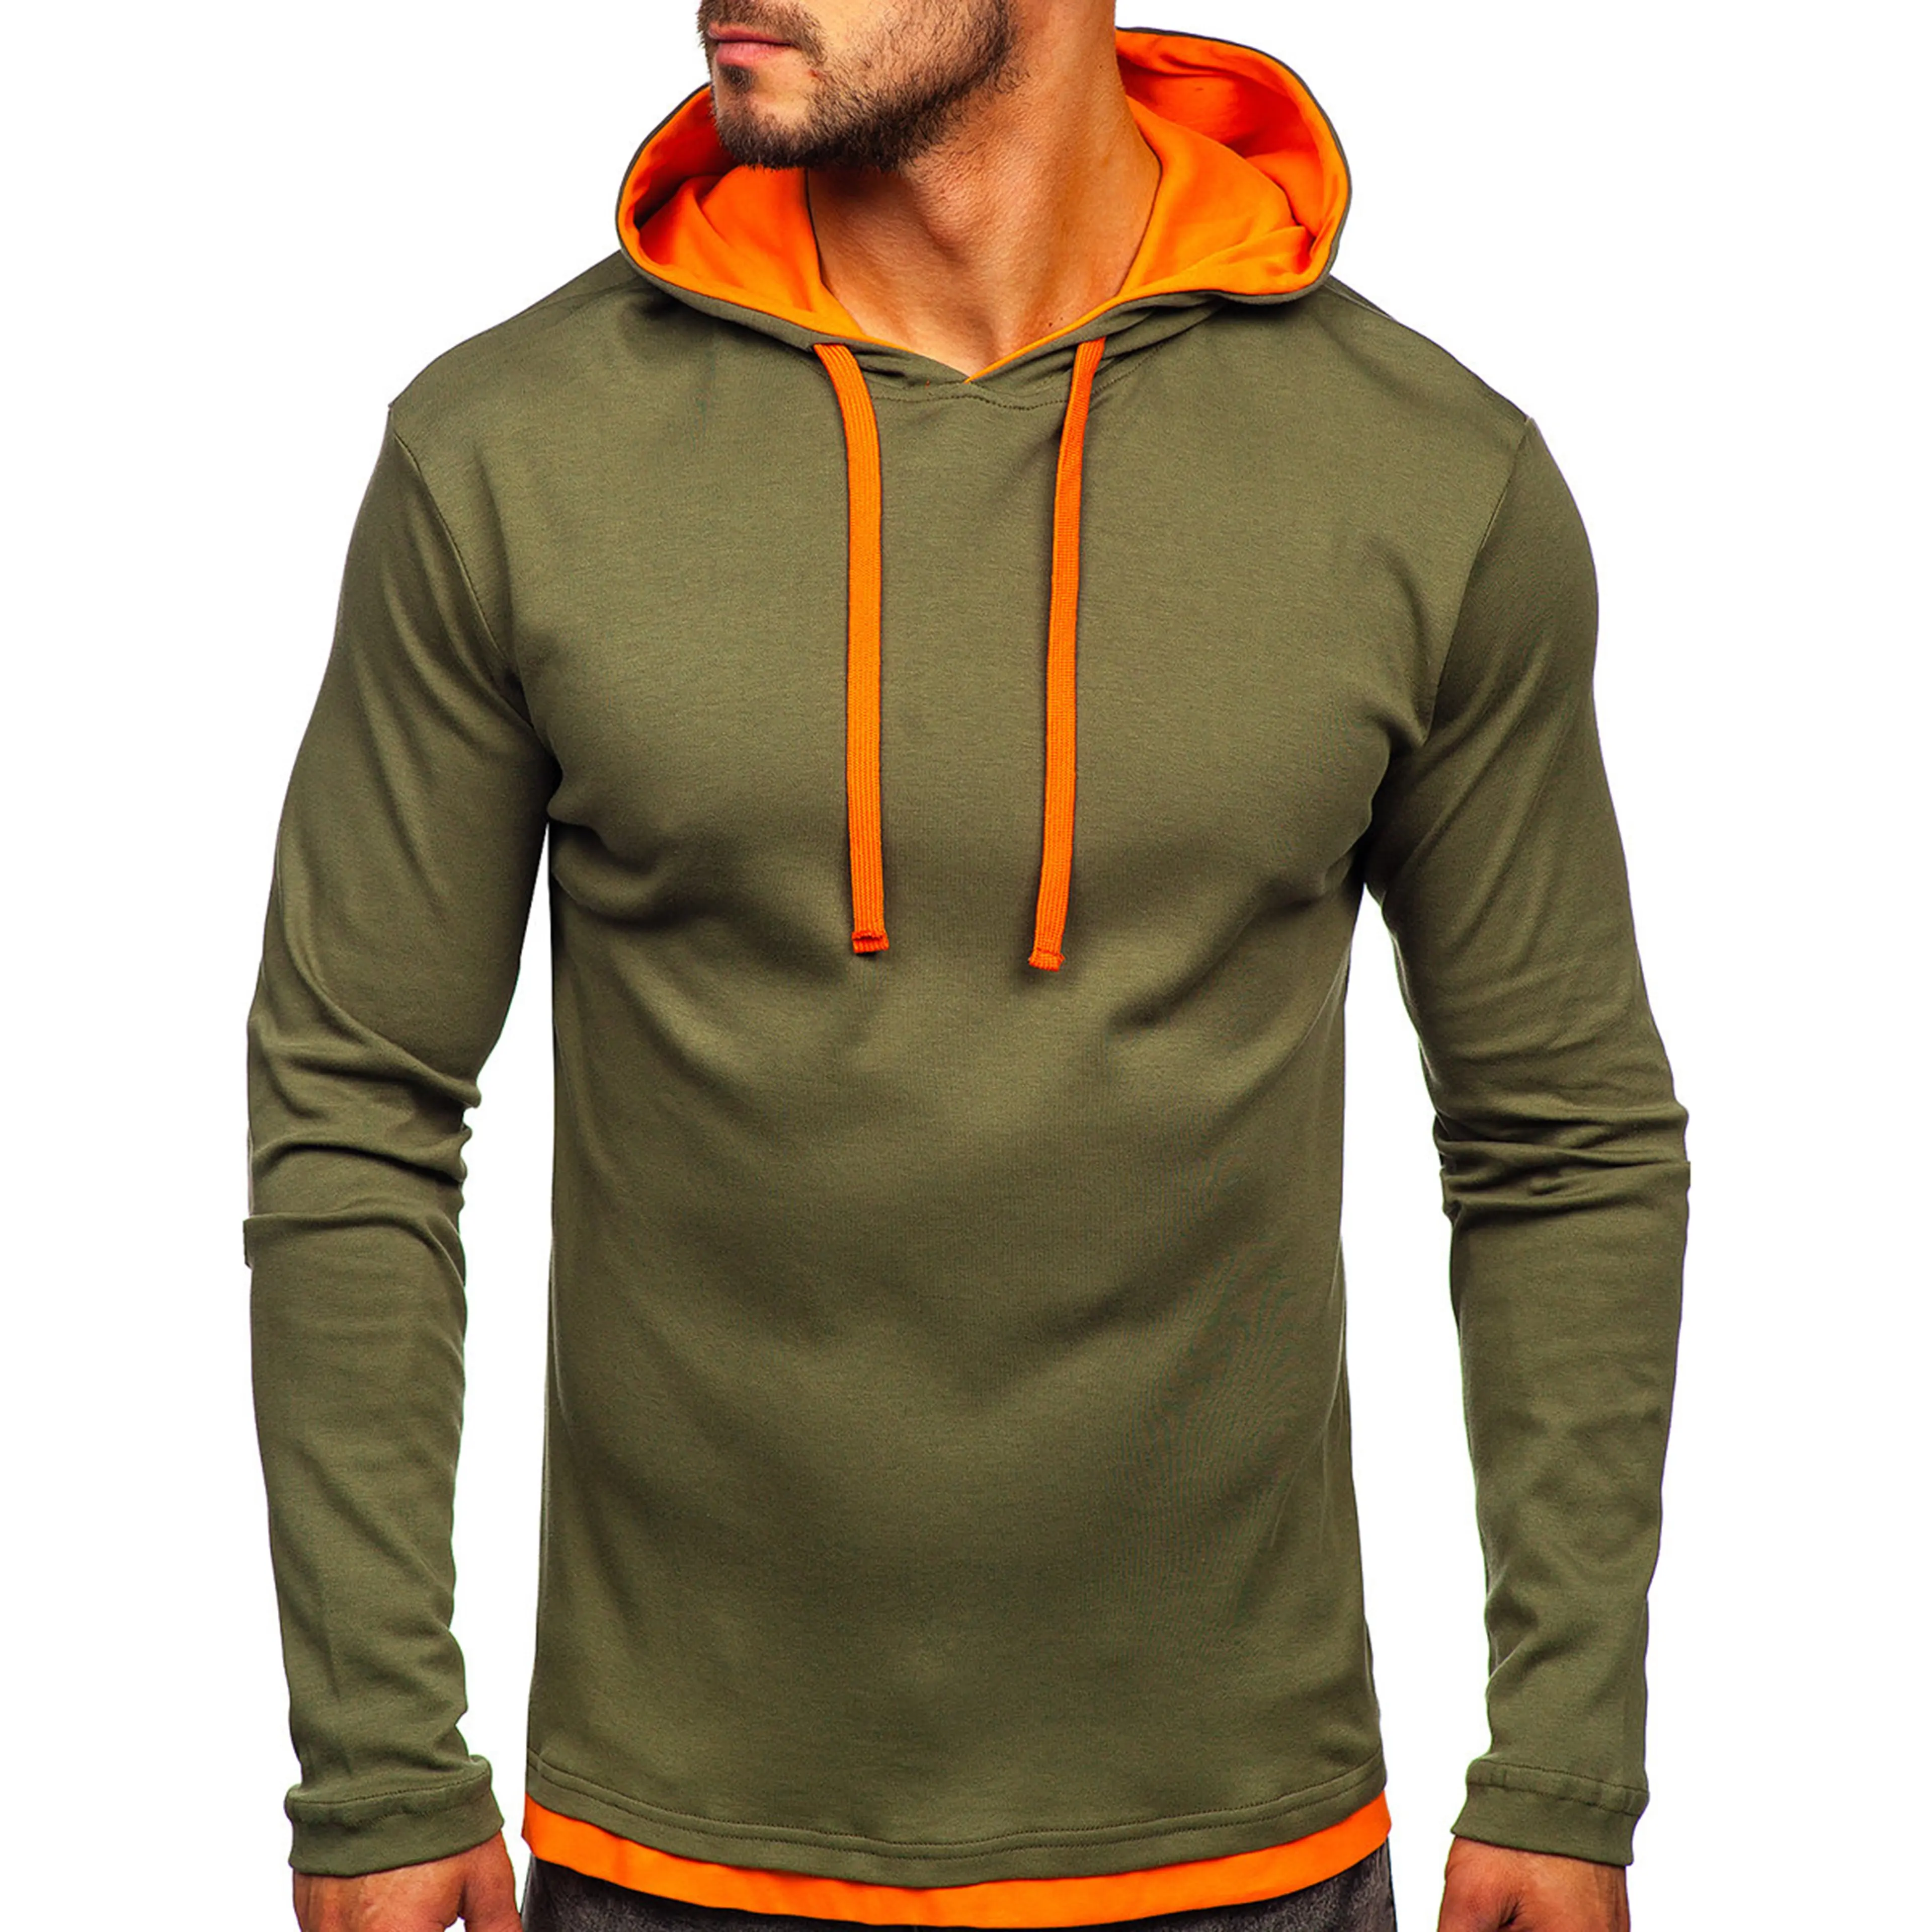 Cotton Hoodie Mens Hoodies 340g High Quality 100% Cotton Pullover Warm Wholesale Custom Printing